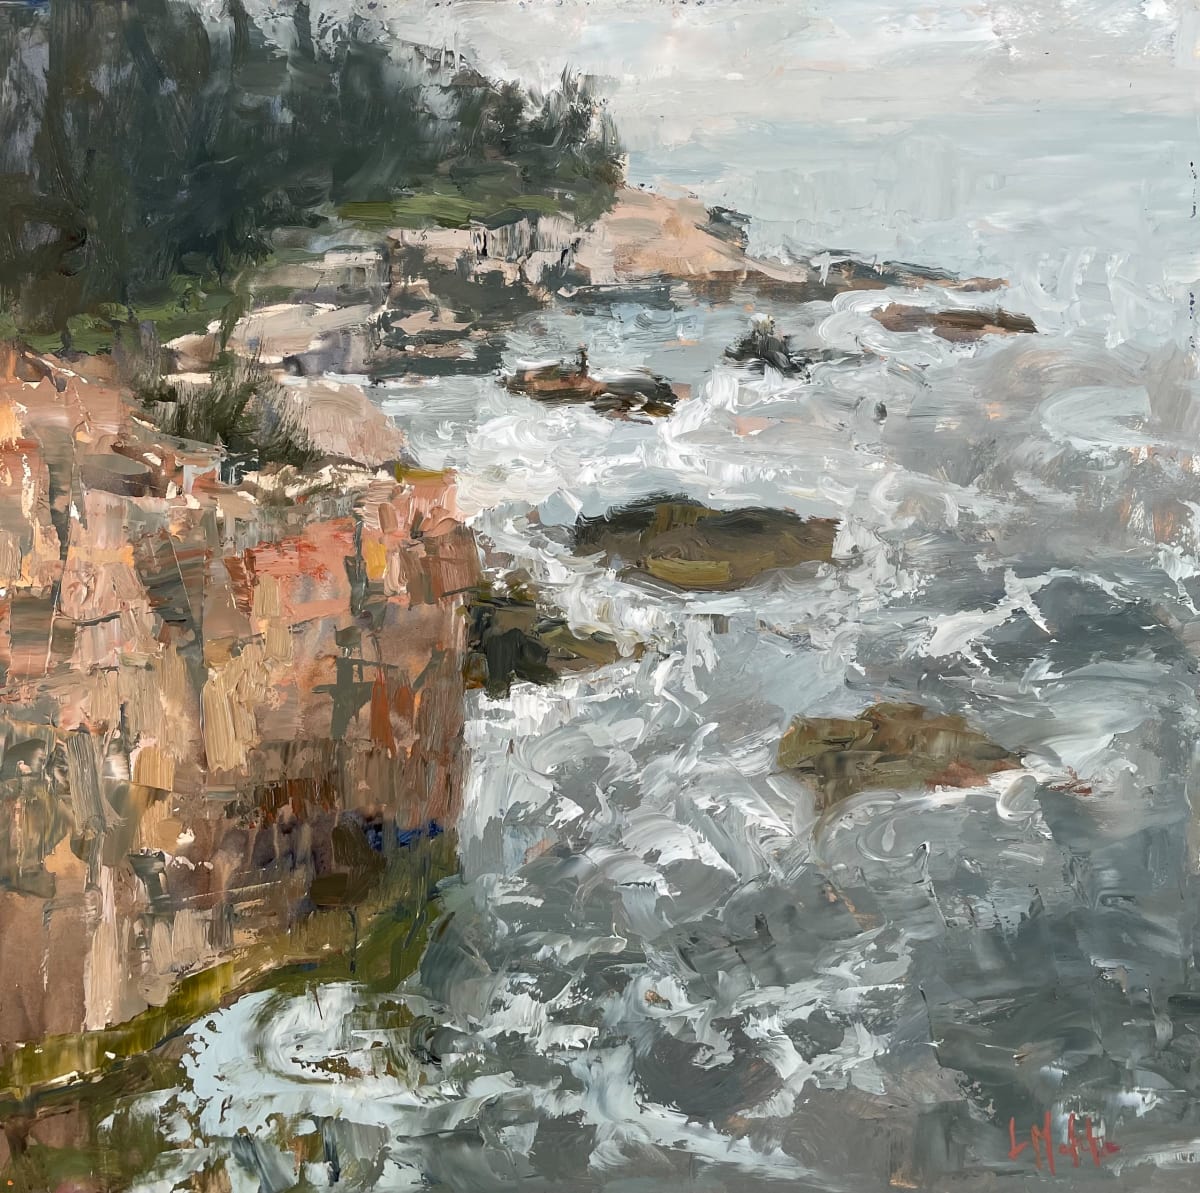 Cliff Side by Lynn Mehta  Image: Cliff Side, 12" x 12"